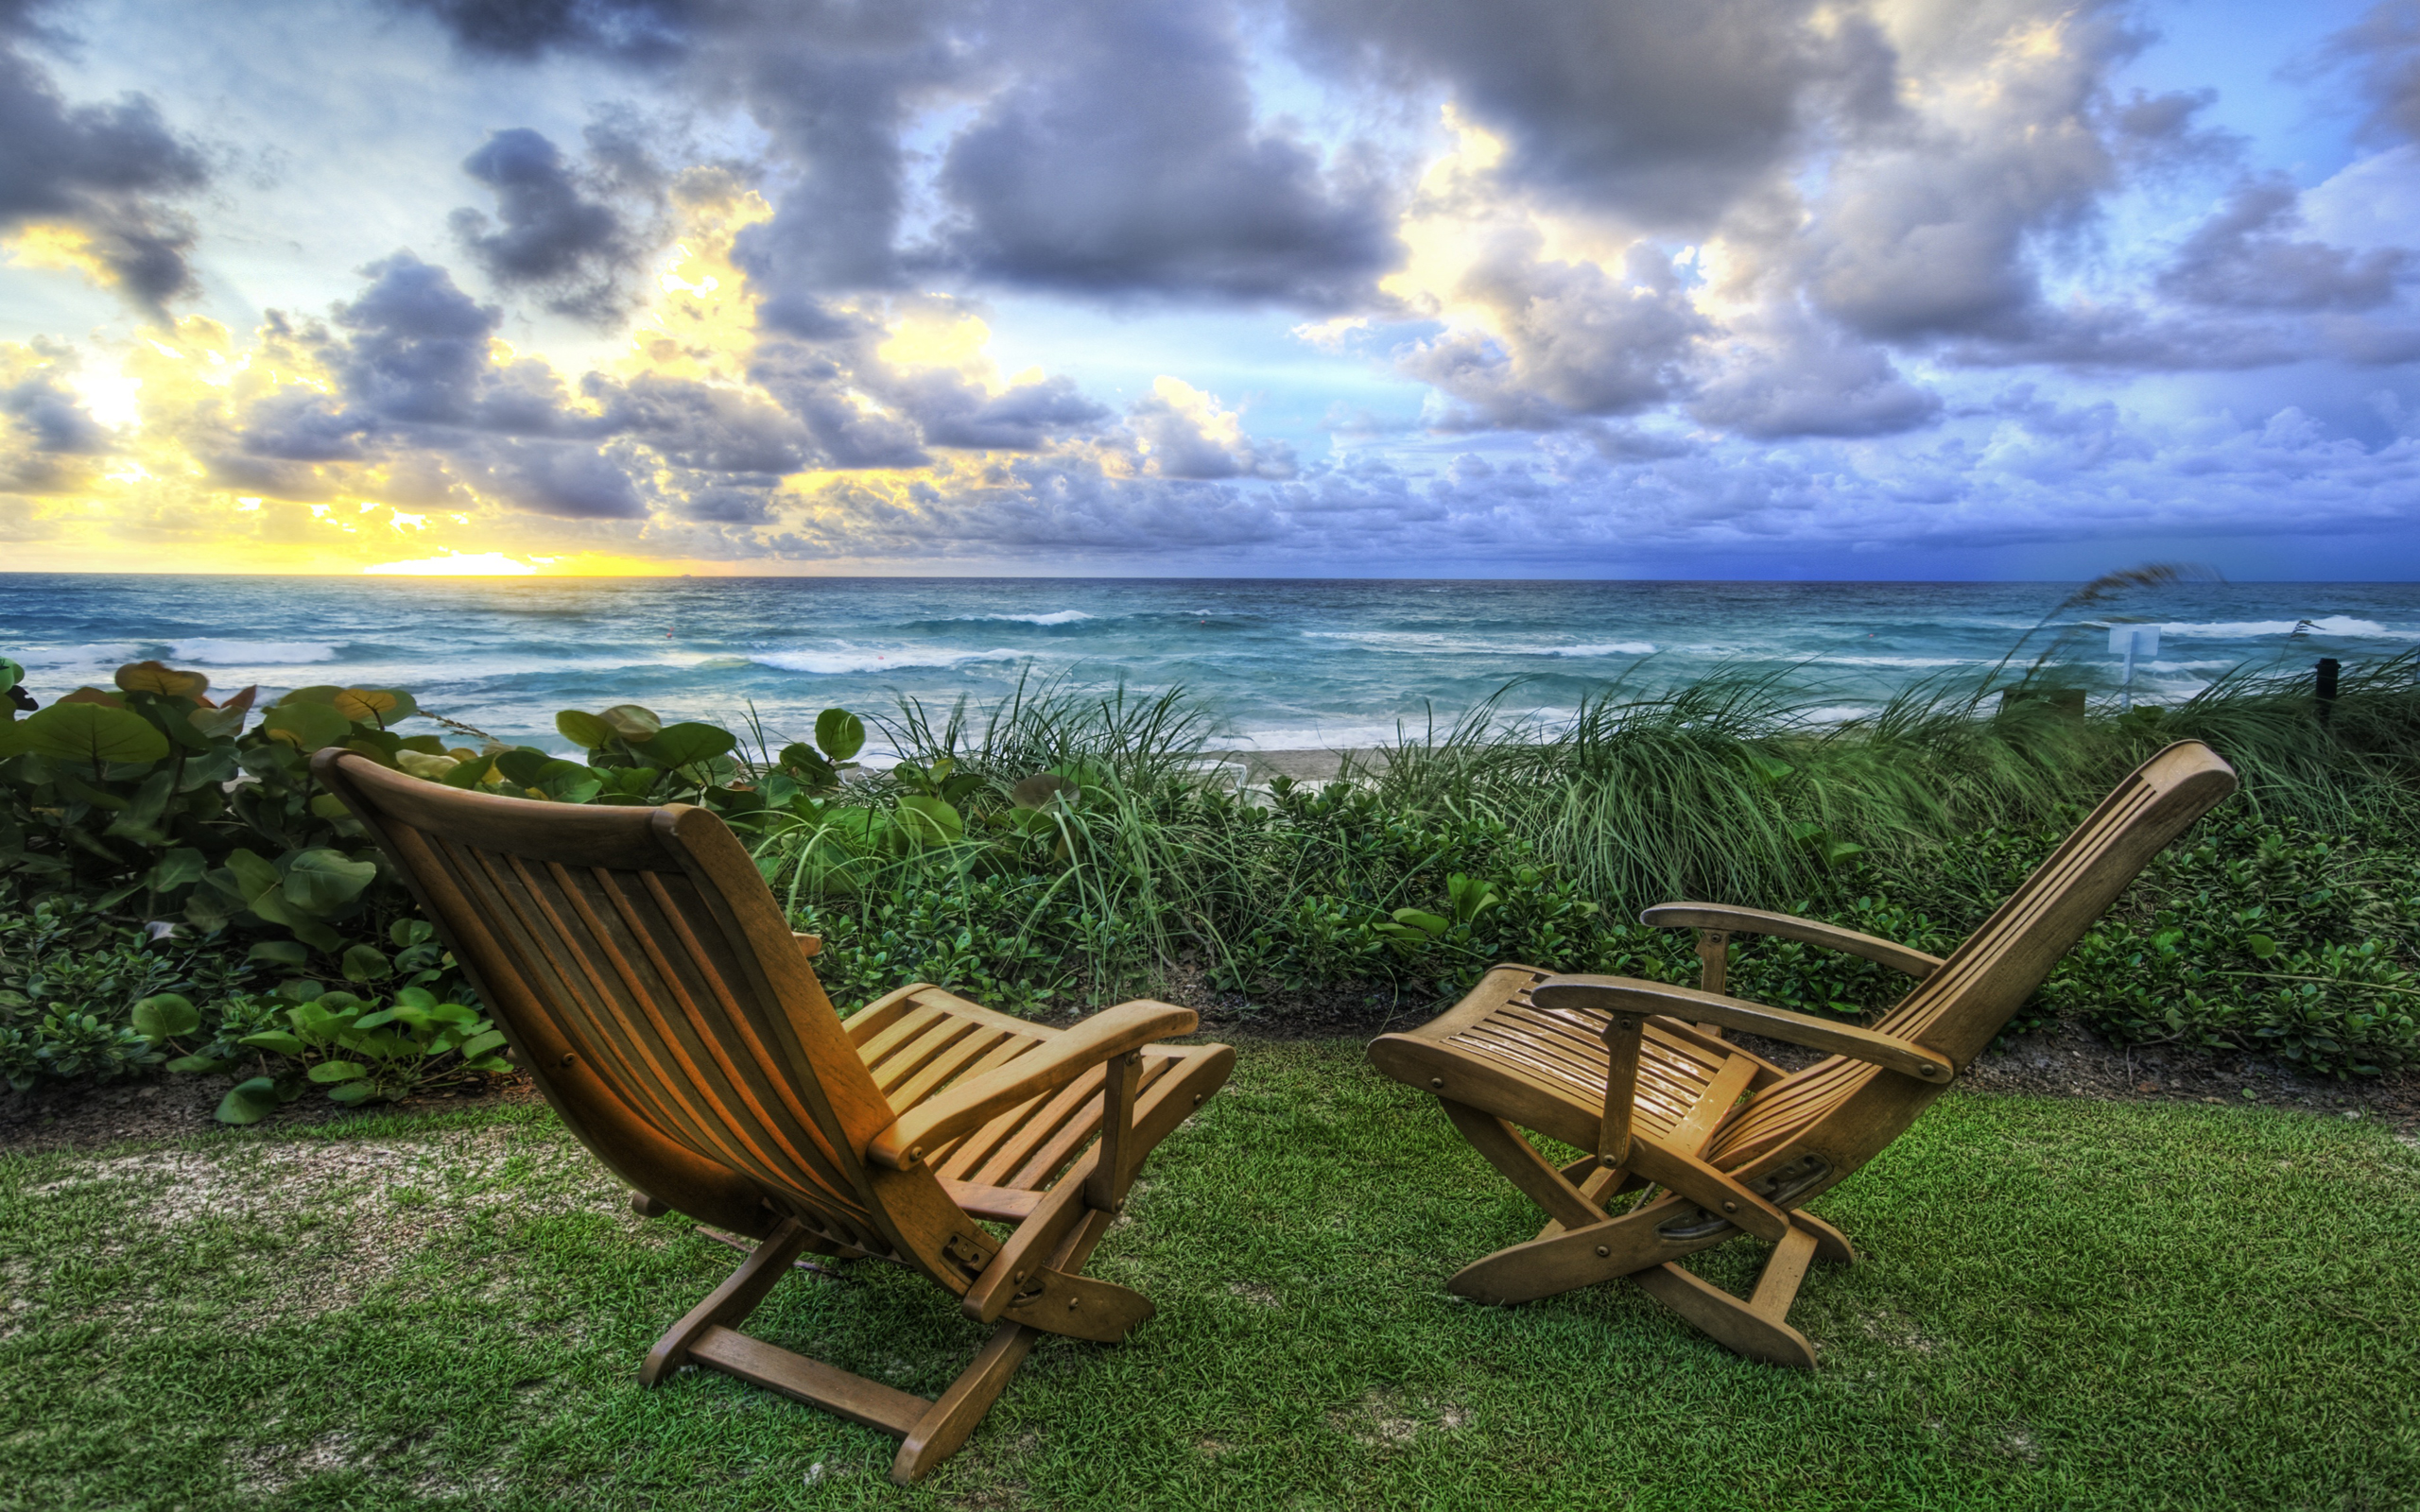 Lawn Chairs With Beach Wallpaper Background